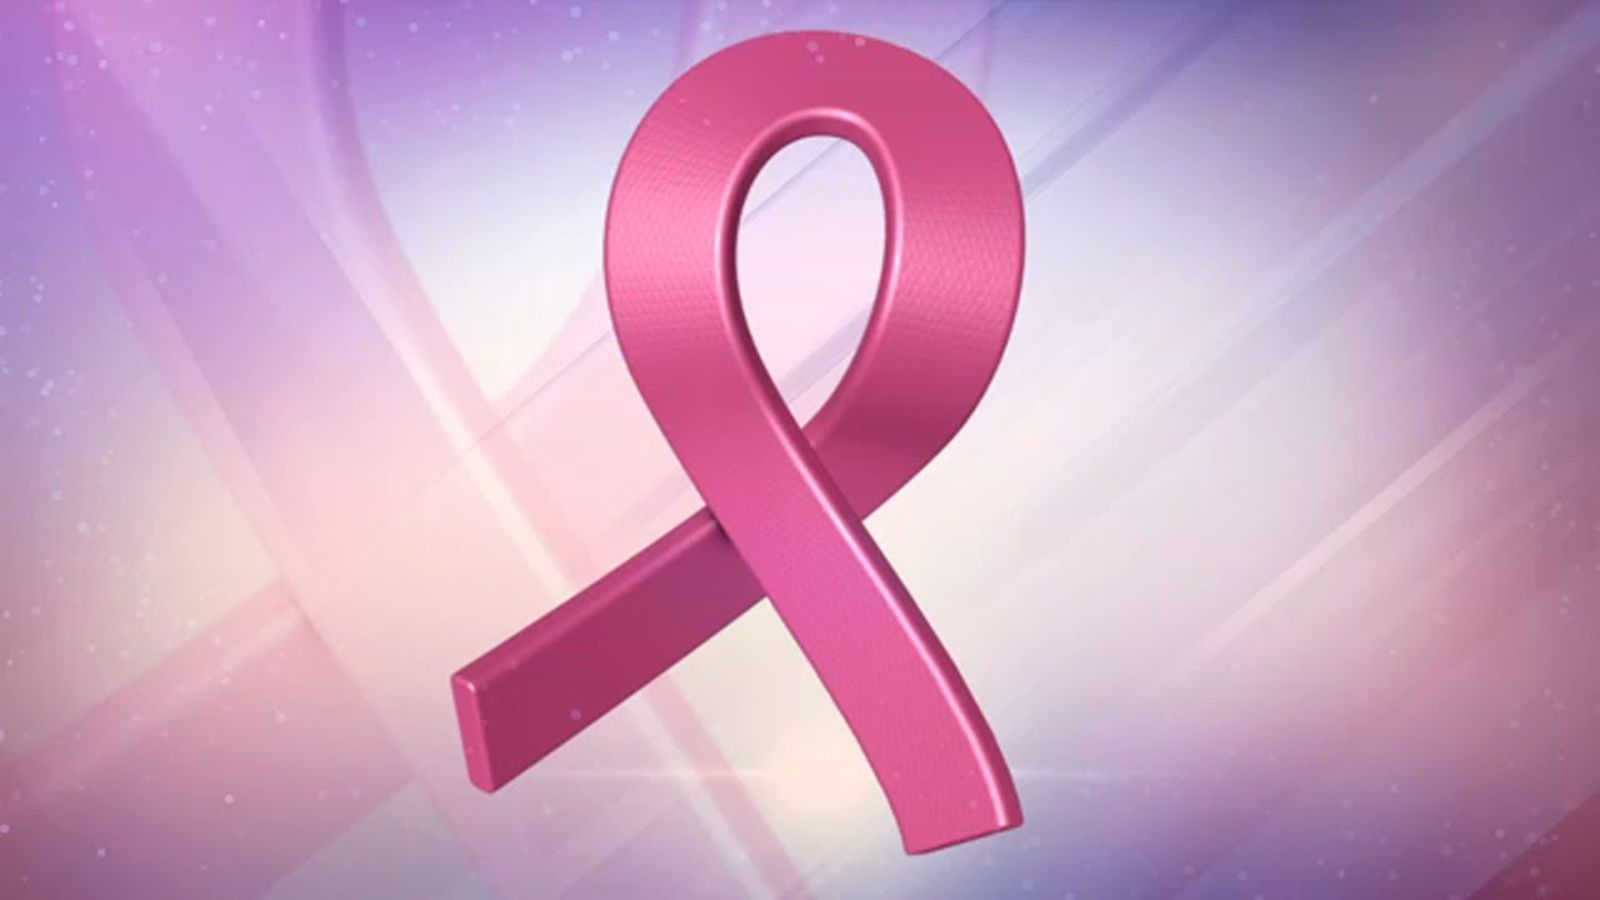 October is National Breast Cancer Awareness Month, share these resources San Francisco